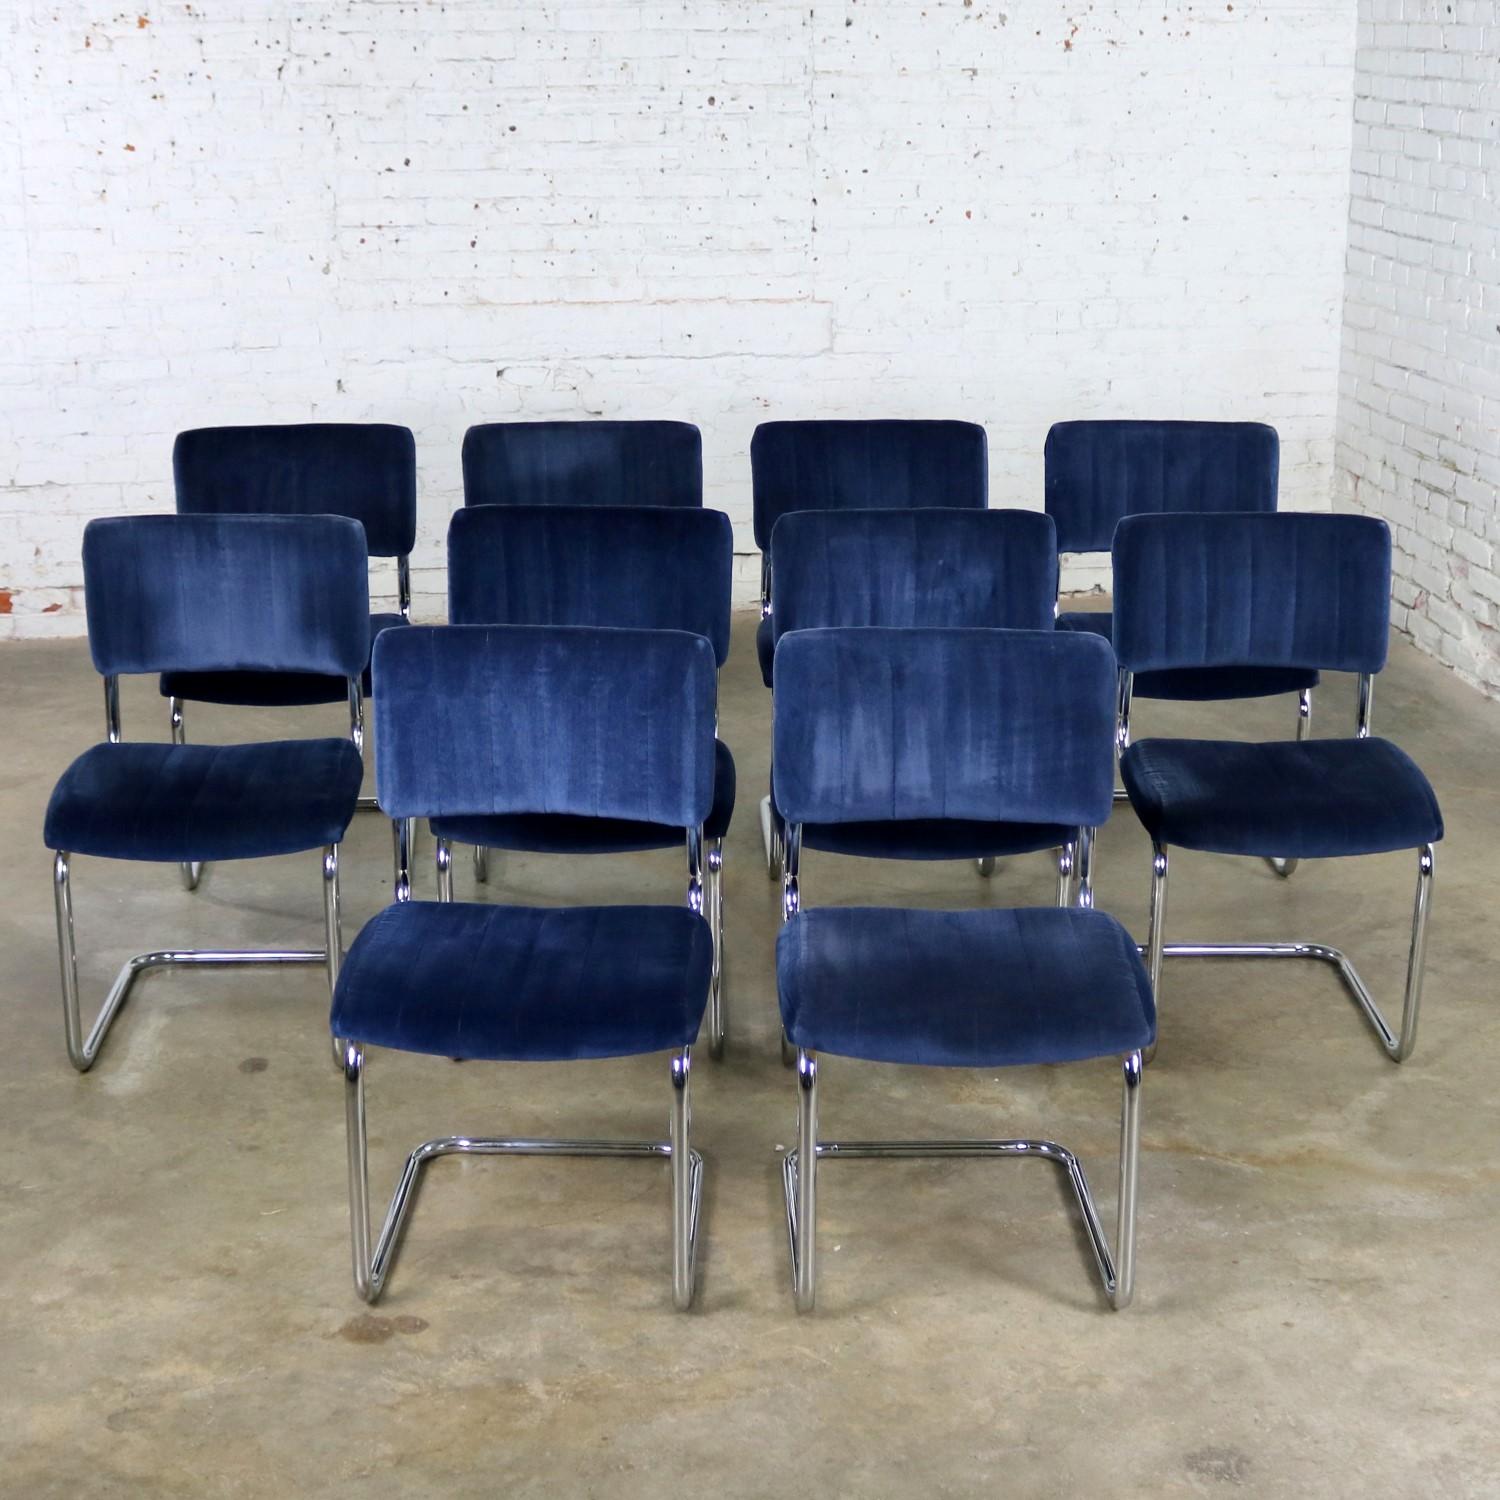 Wonderful set of 4 cantilevered chrome and light blue velvet dining chairs after the Cesca chair designed by Marcel Breuer in 1928. This set is made by Segars Tubular Products and all ten of the chairs are in wonderful vintage condition with normal